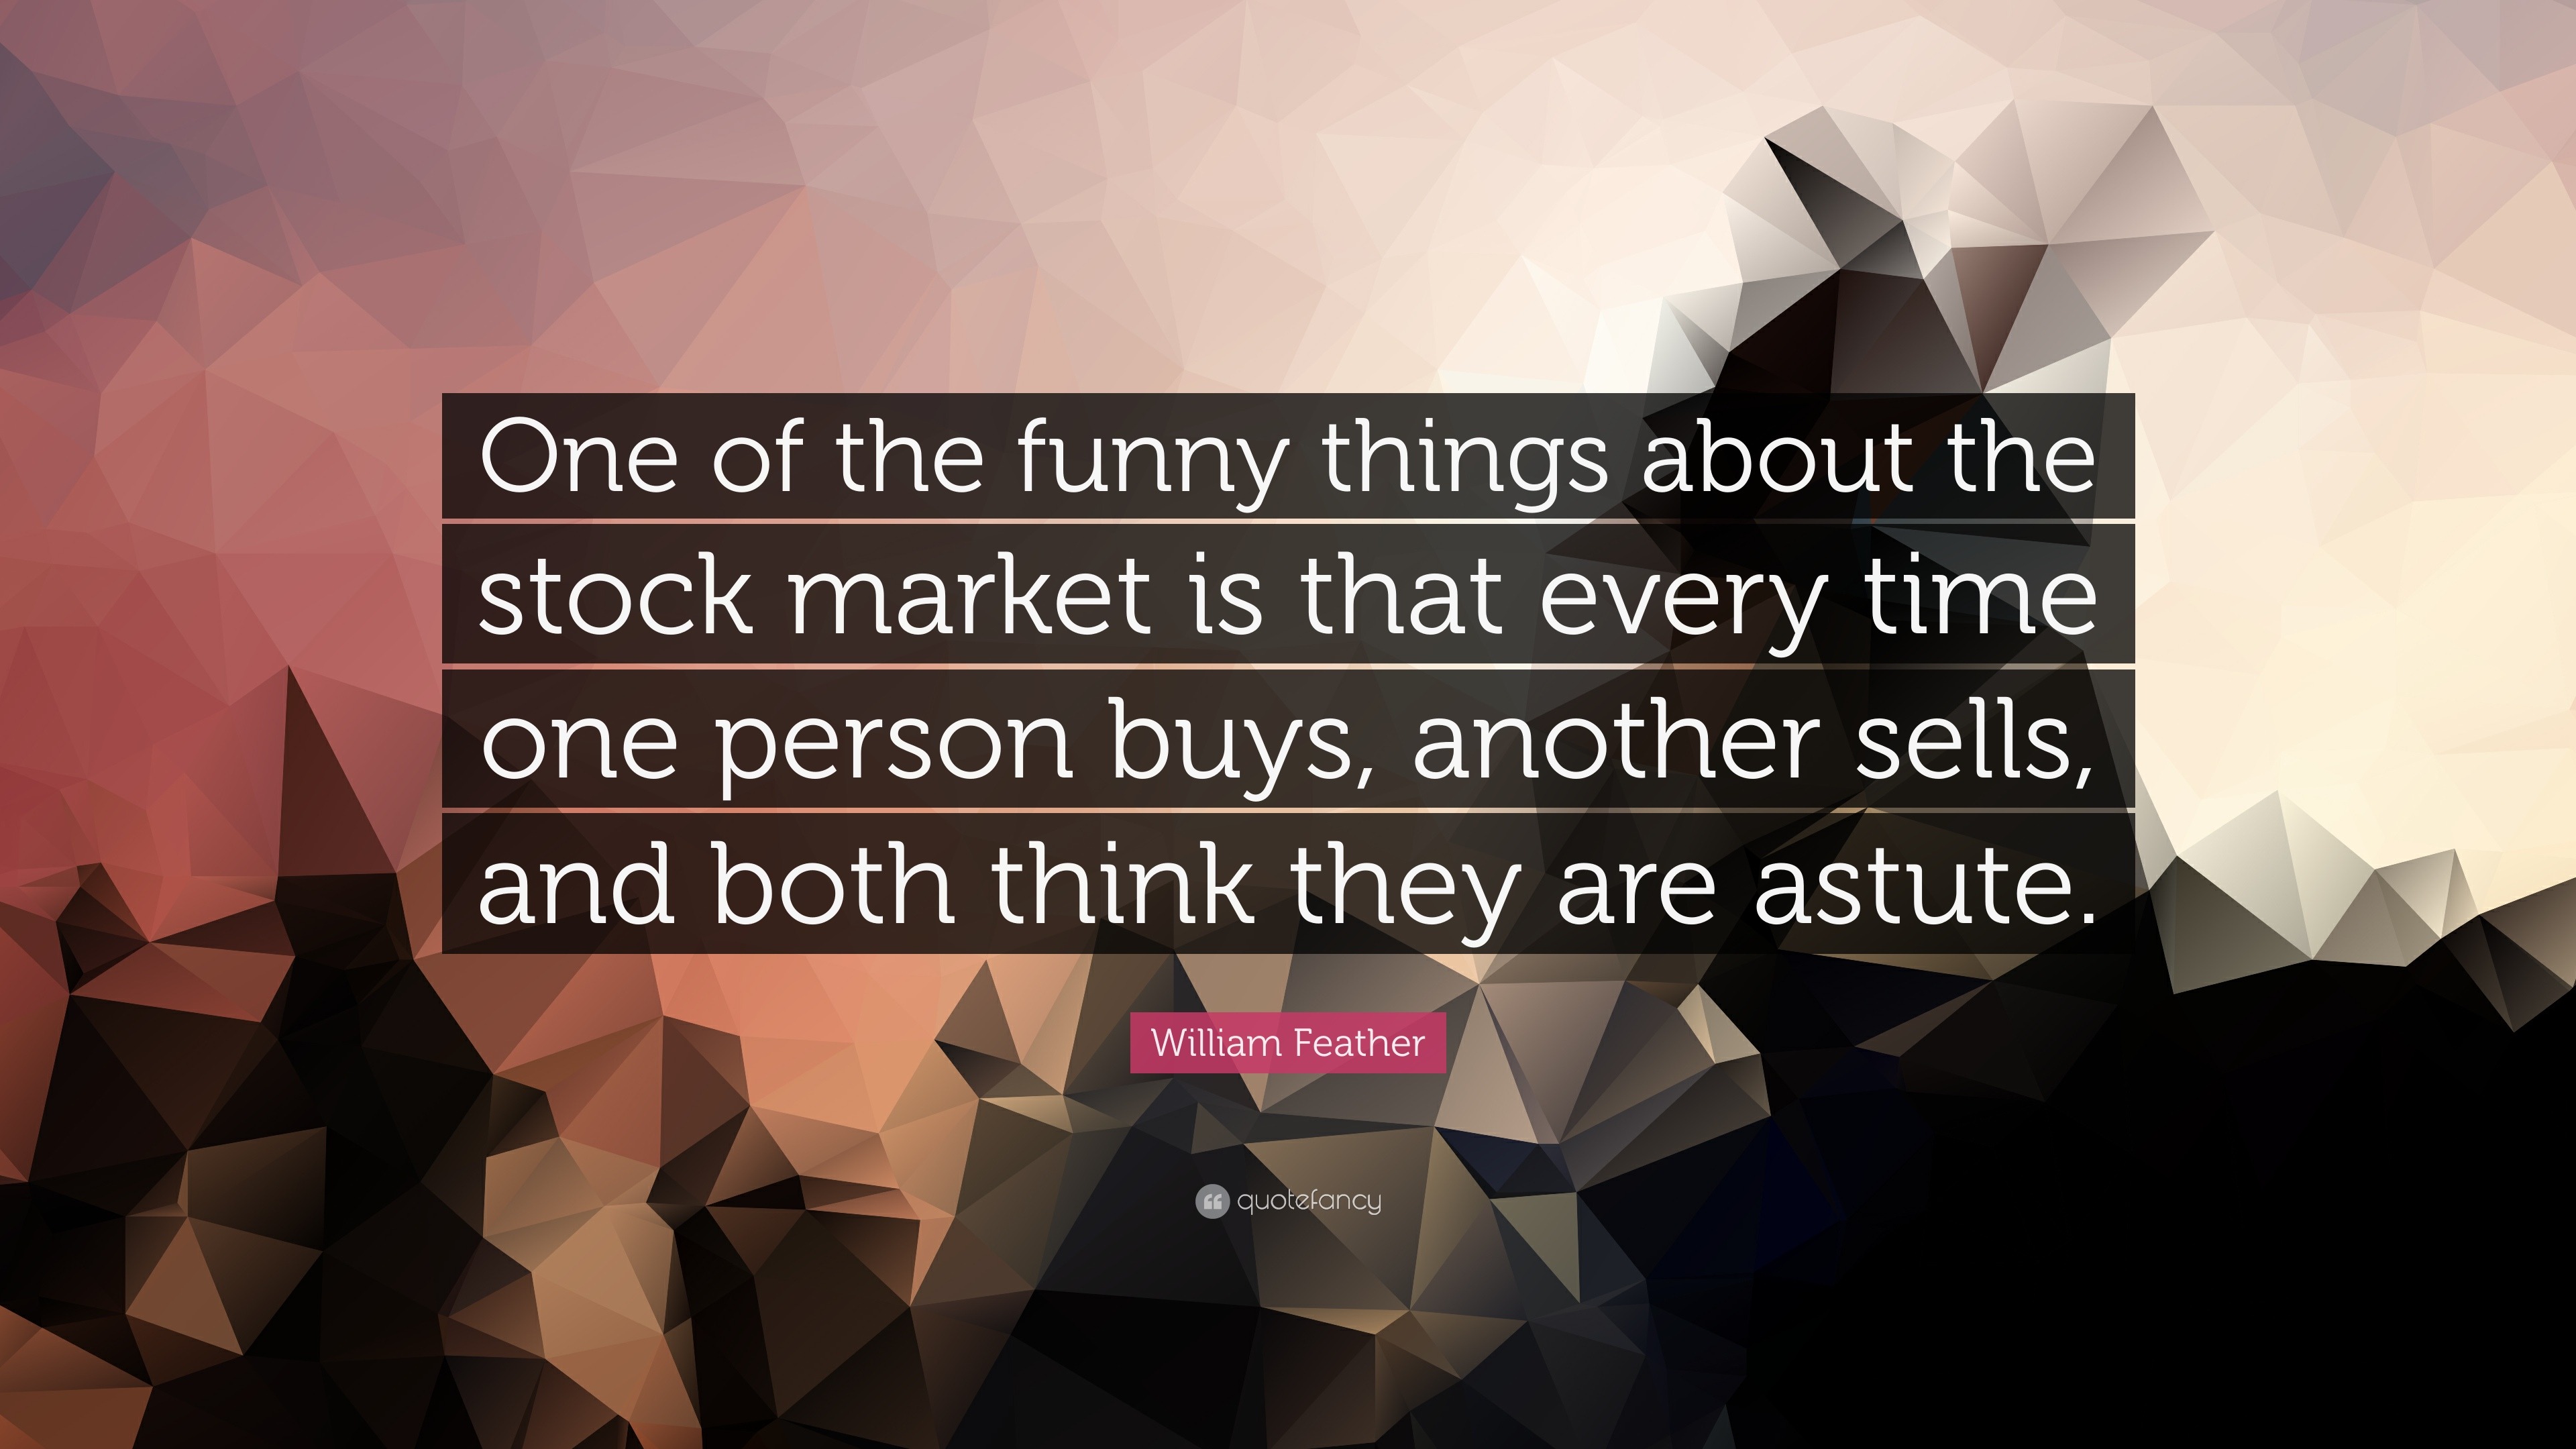 William Feather Quote: “One of the funny things about the stock market